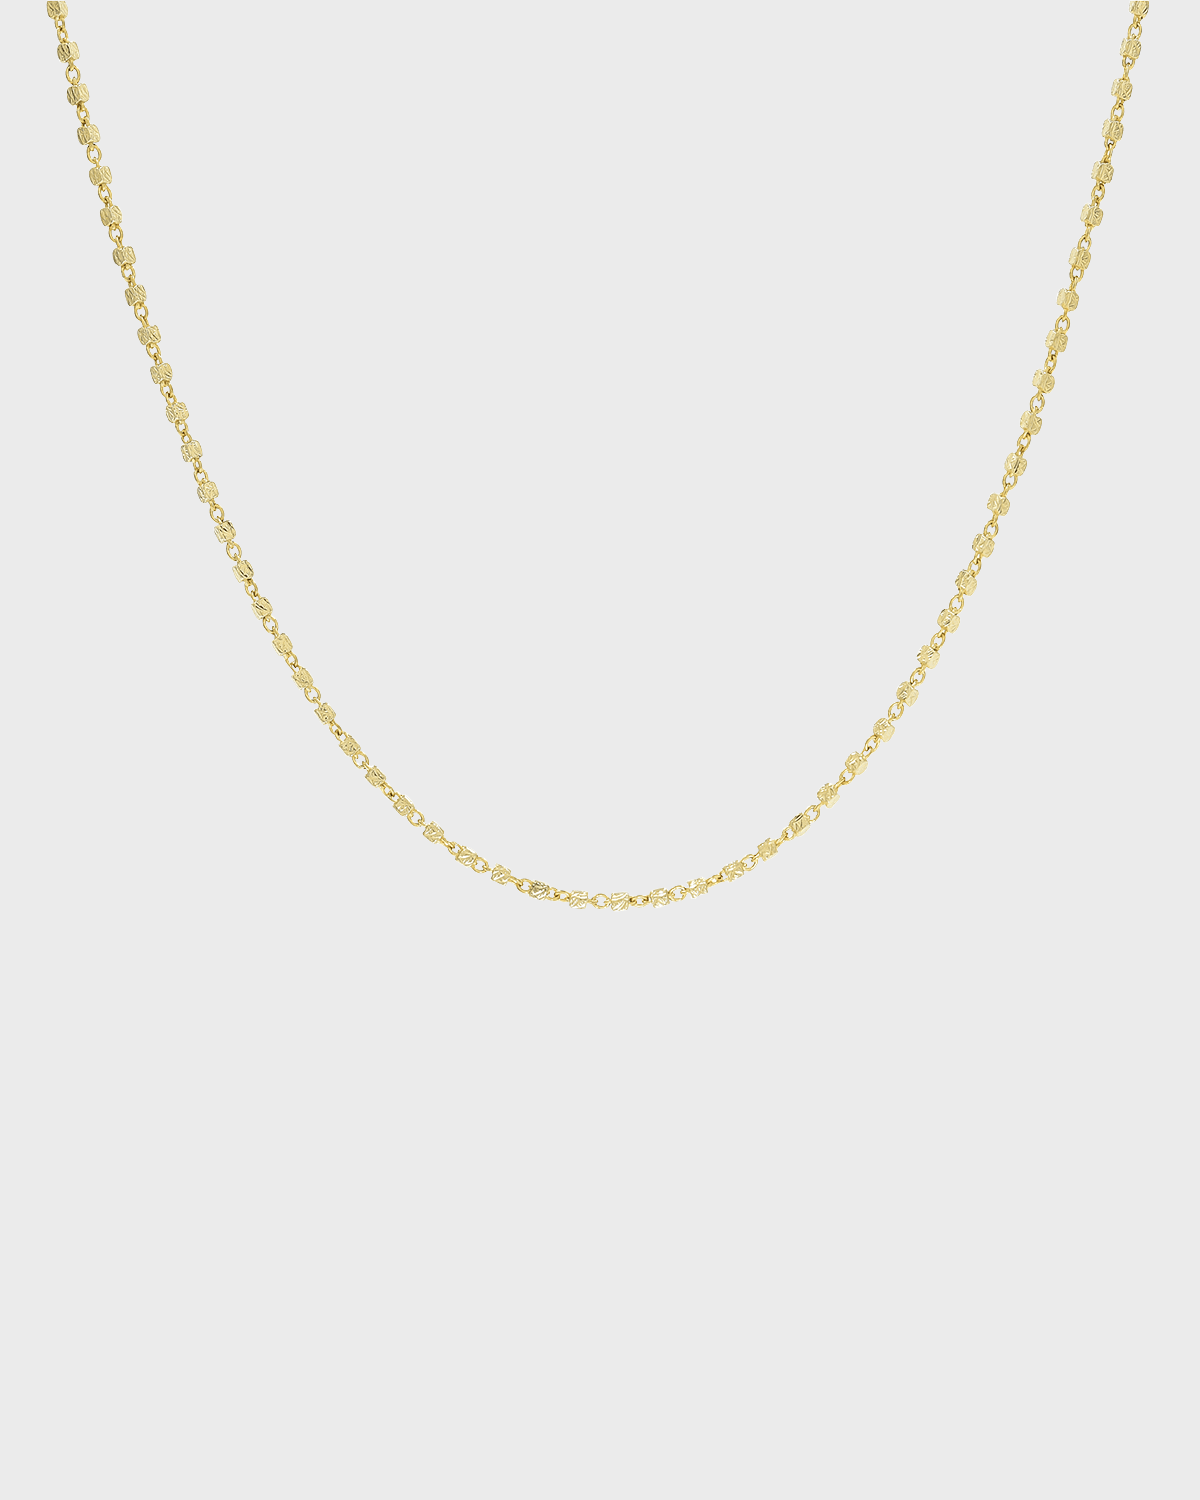 BONDEYE JEWELRY 14k Gold Speckled Rope Chain Necklace